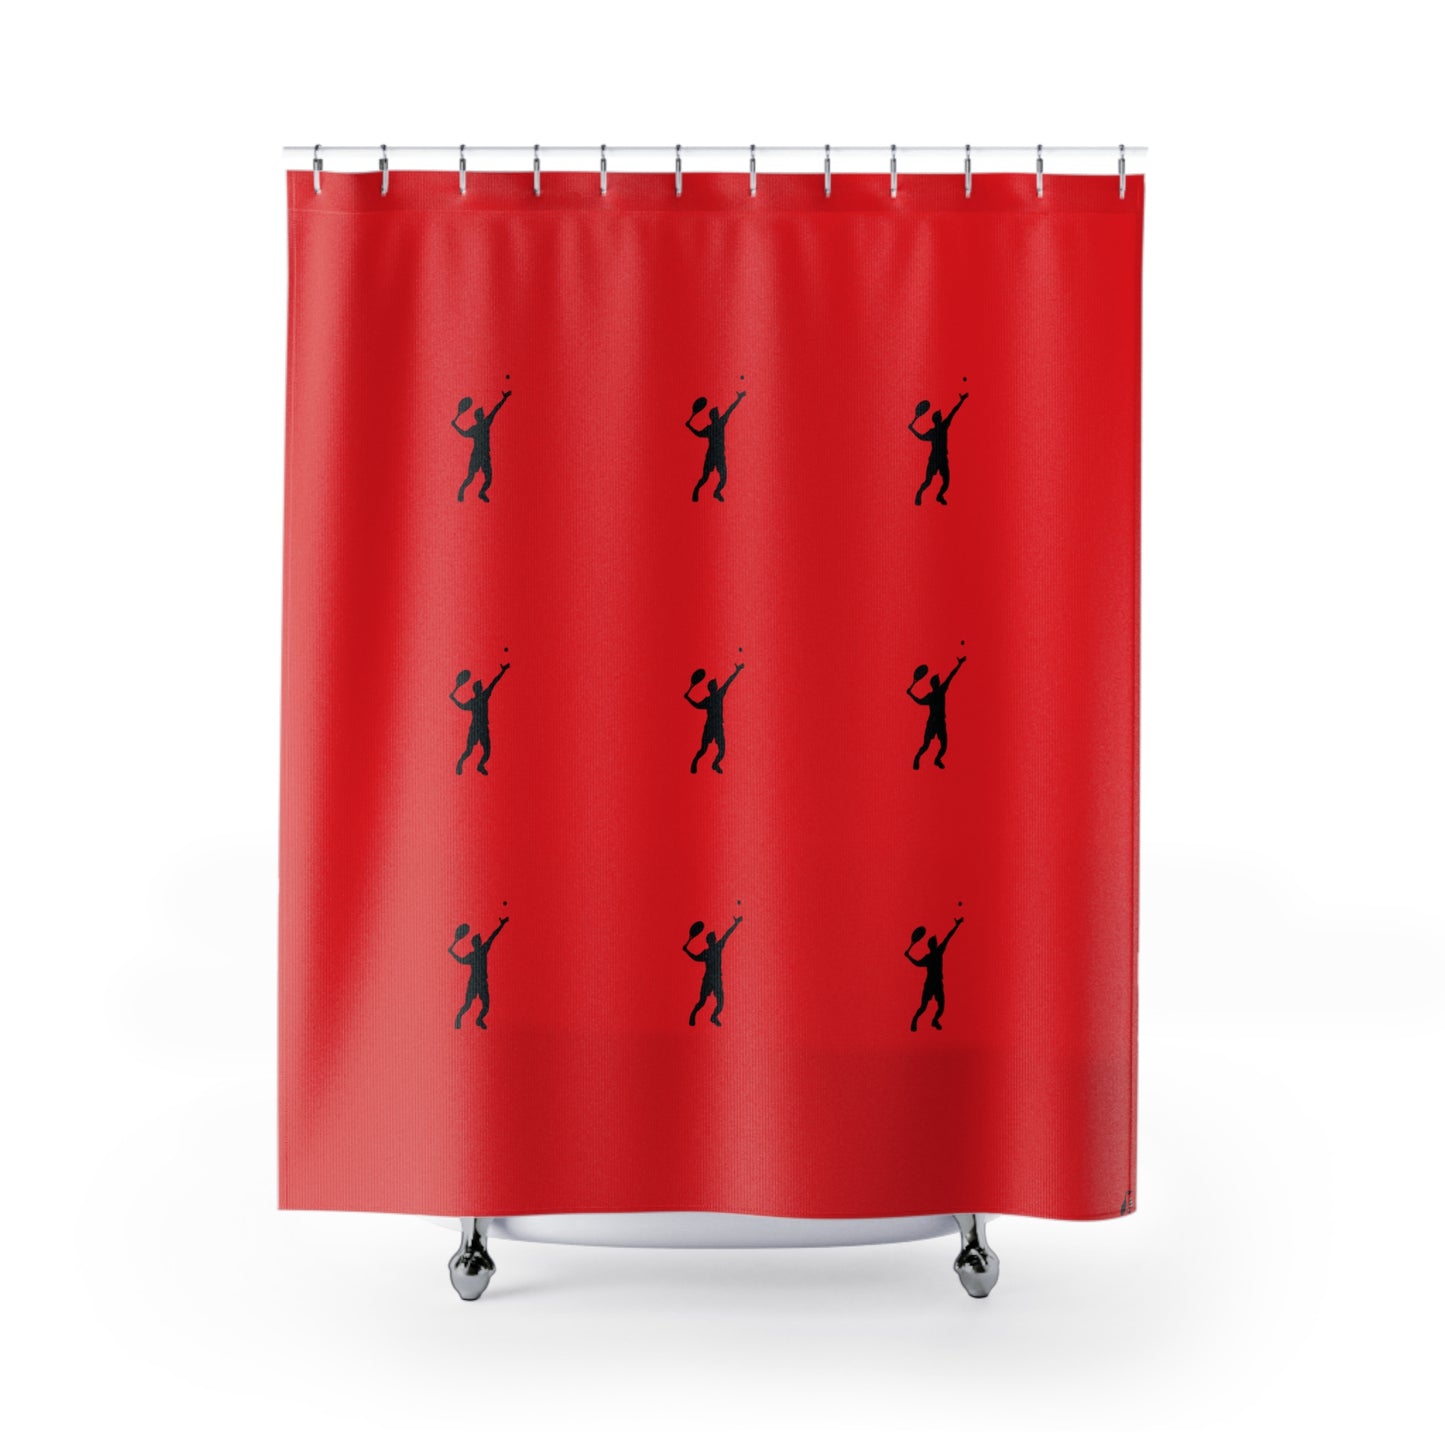 Shower Curtains: #2 Tennis Red